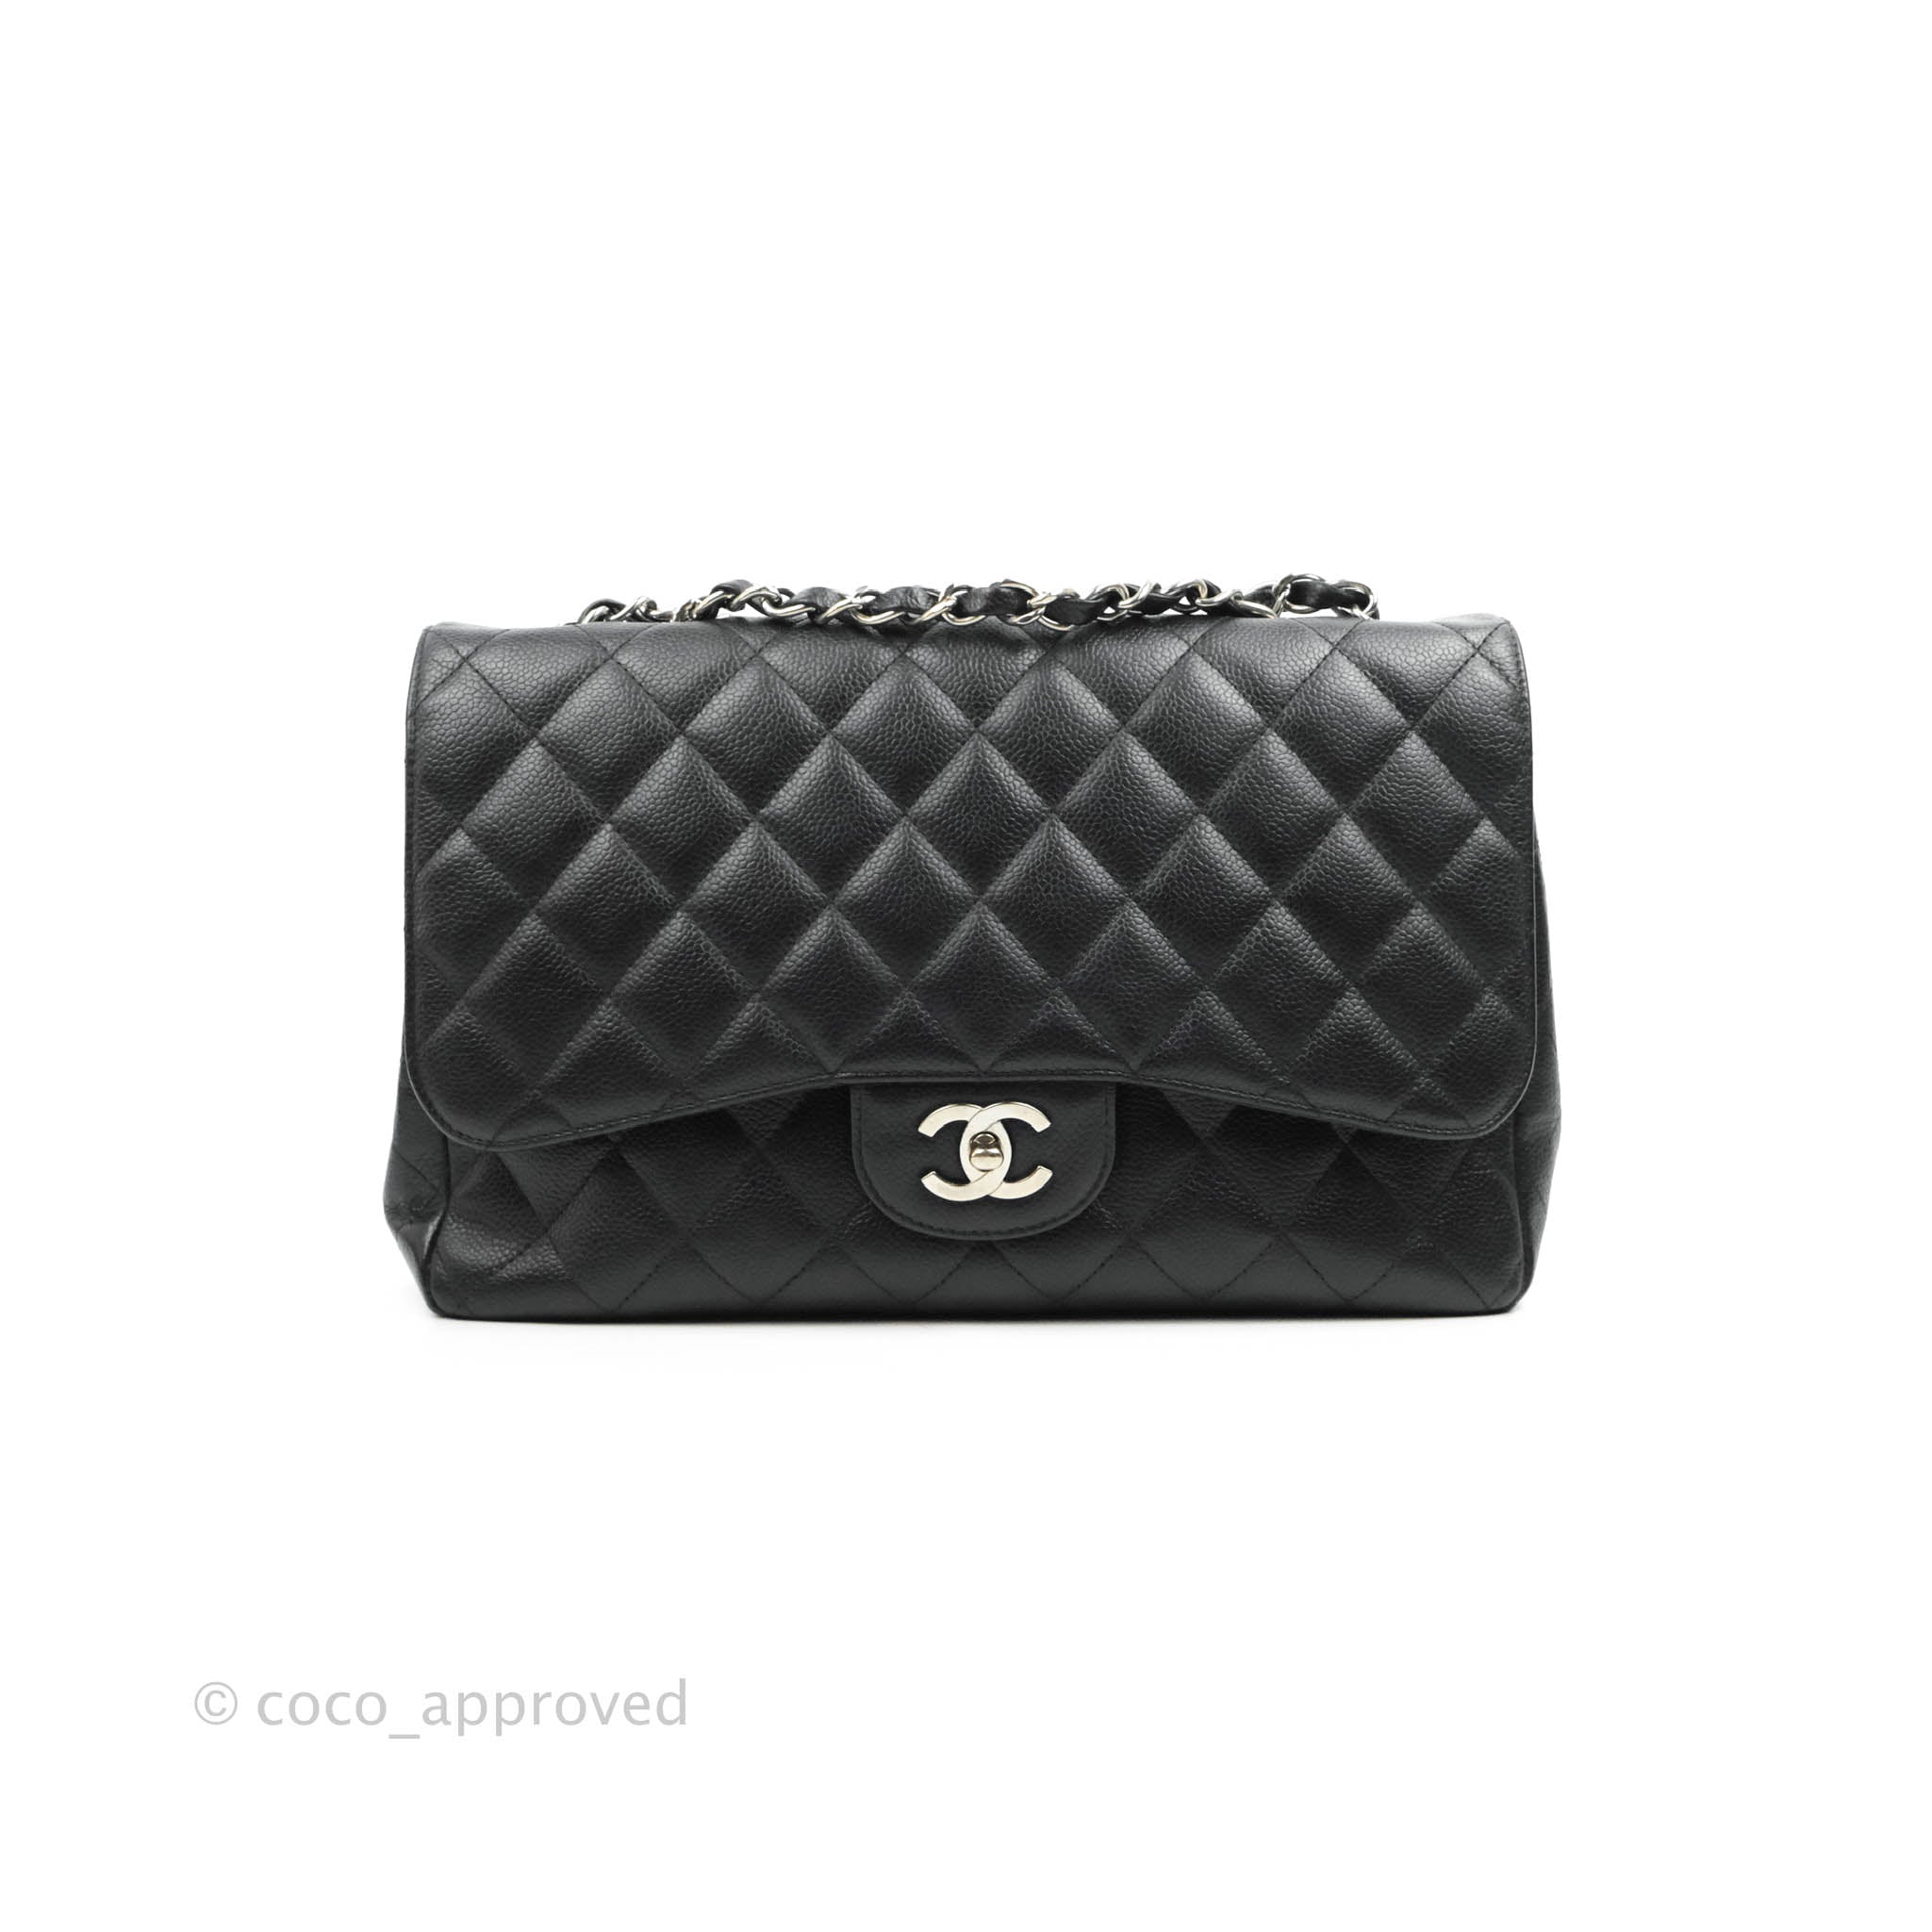 CHANEL, Bags, Authentic Nwt Chanel Caviar Quilted Jumbo Single Flap Black